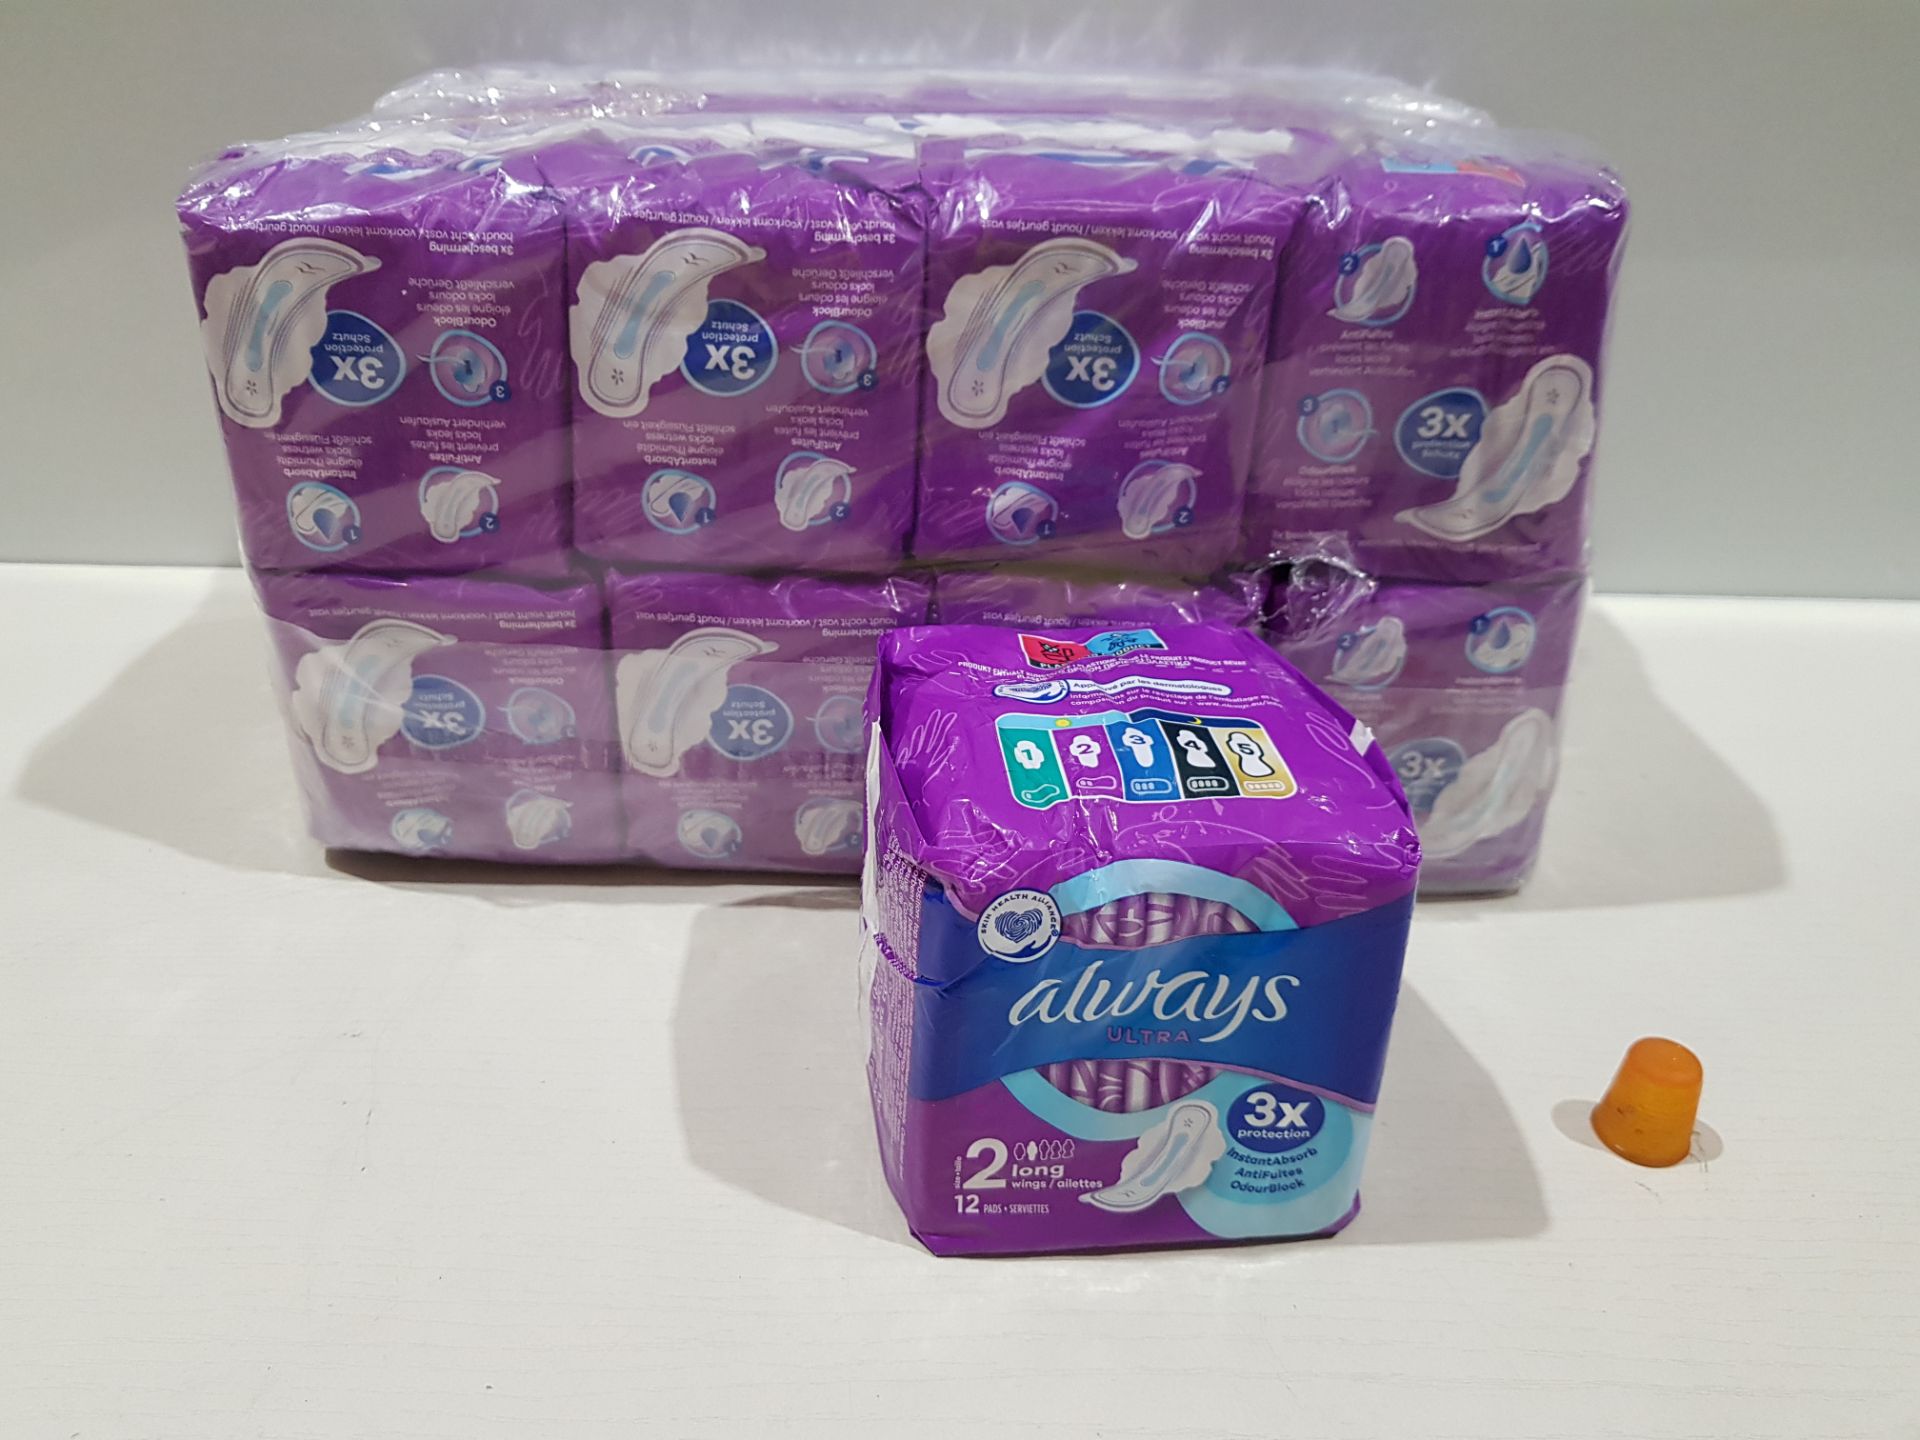 128 X BRAND NEW PACKS OF 12 - ALWAYS ULTRA SCENTED SANITARY PADS - ( SIZE 2 LONG ) - IN 2 BOXES